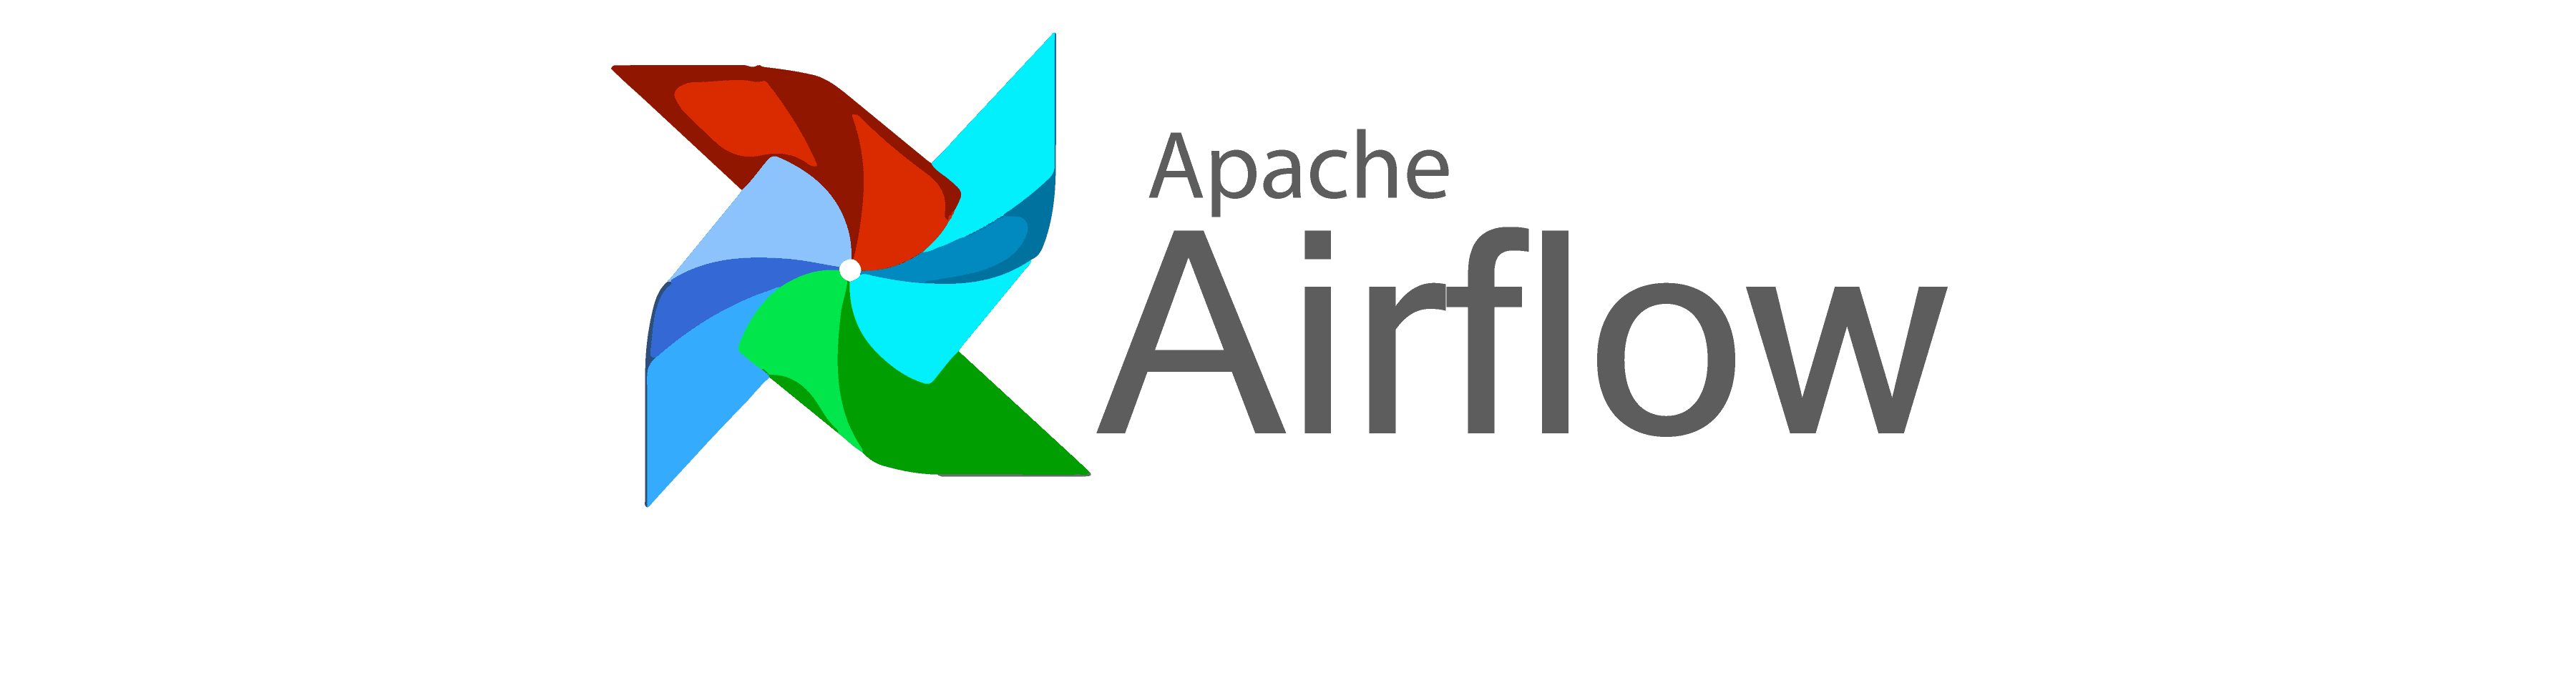 Getting started with Apache Airflow